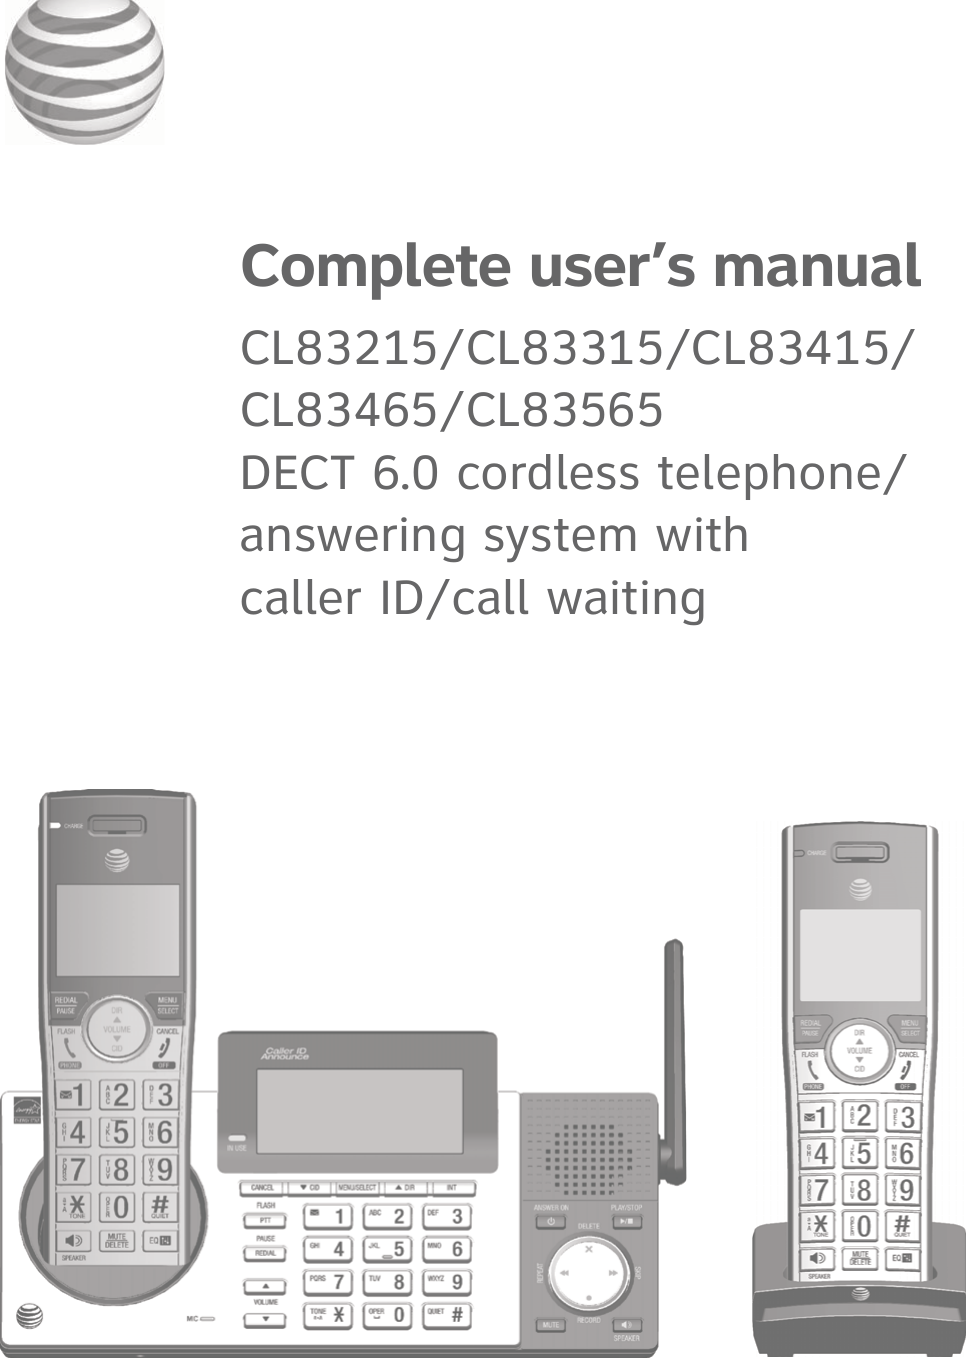 Complete user’s manualCL83215/CL83315/CL83415/CL83465/CL83565DECT 6.0 cordless telephone/answering system with  caller ID/call waiting